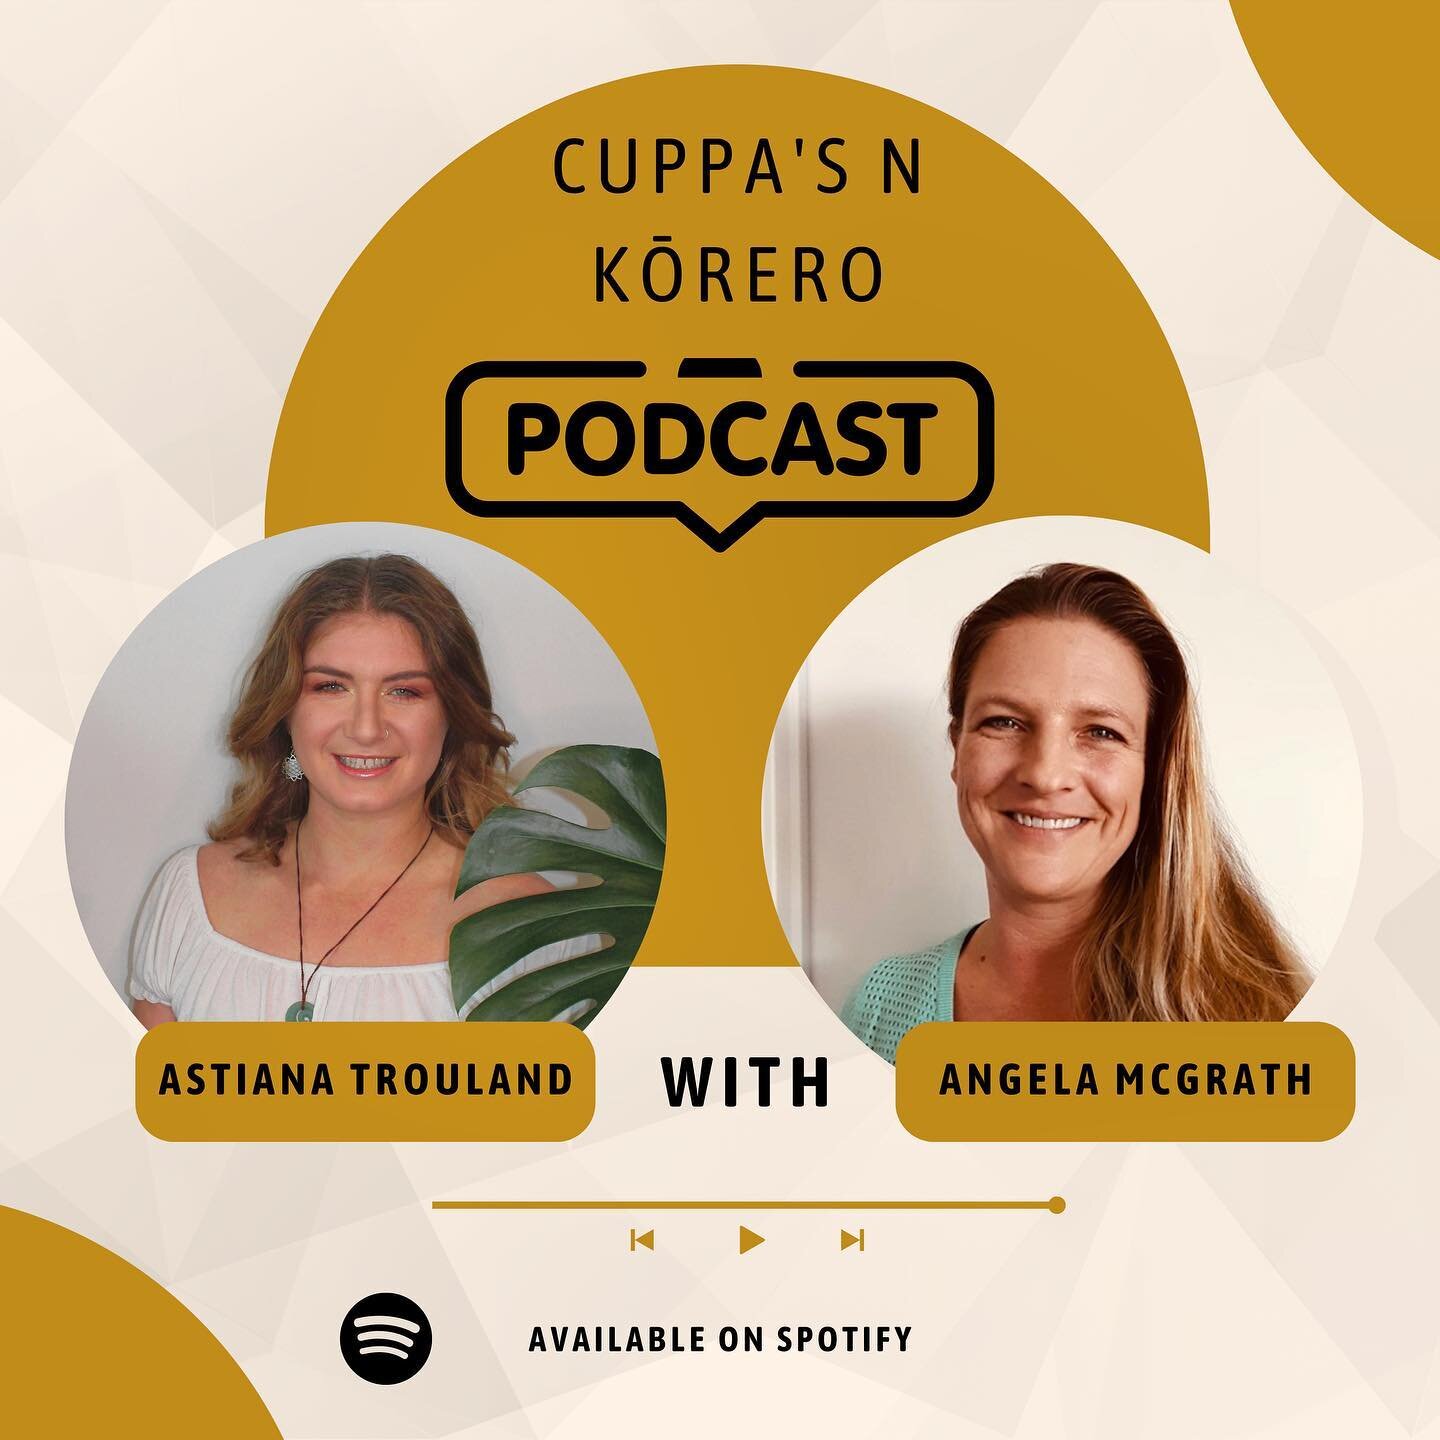 This month on Cuppa's N Kōrero, Angela McGrath joins me for an hour of sharing her experience in the lab of pathology.

For those who do not know this refers to the study of disease in general, incorporating a wide range of biology research fields an